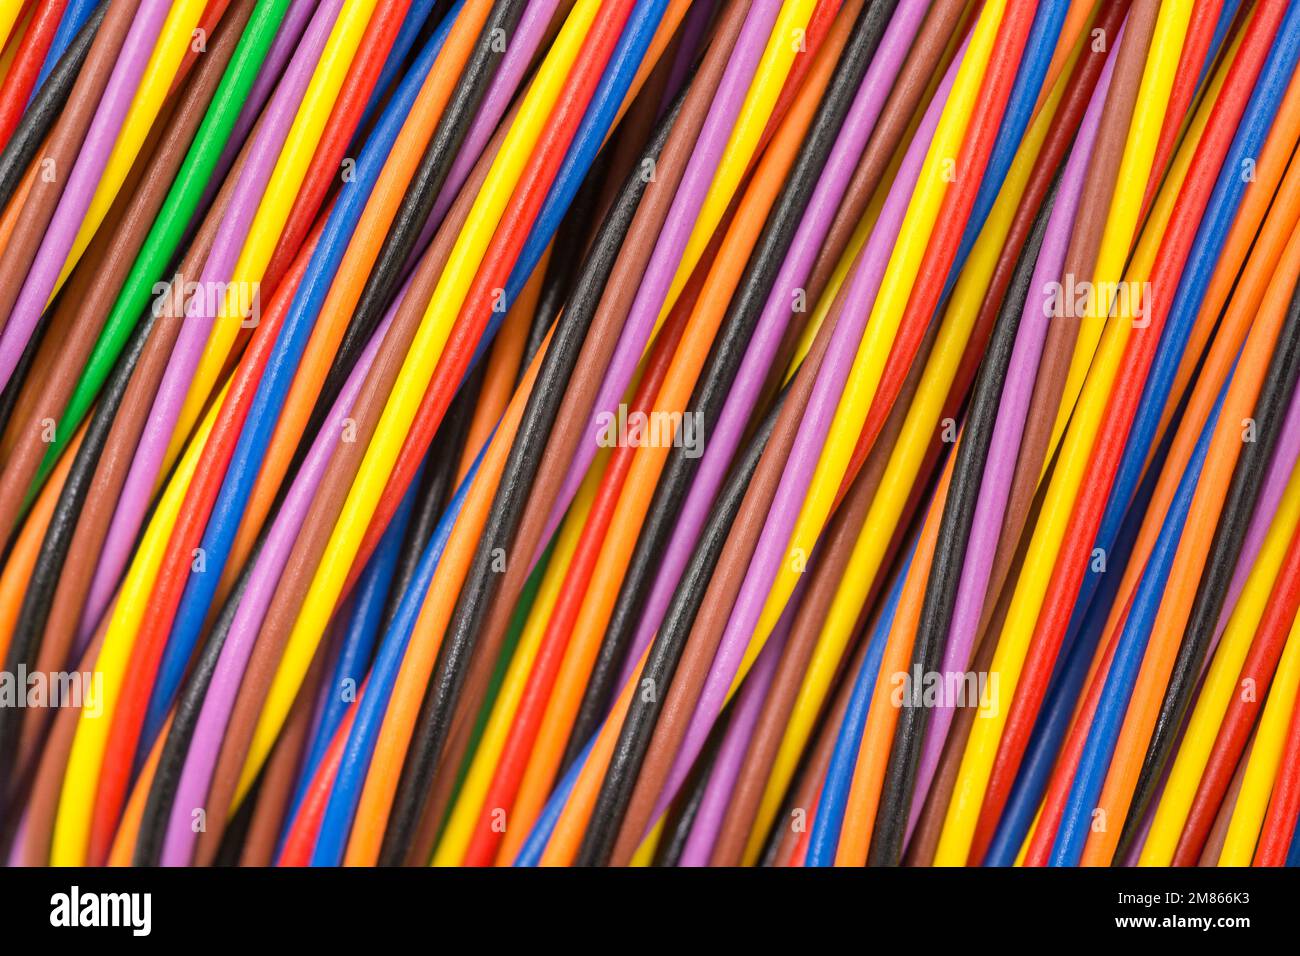 Close-up shot of multi-colored narrow gauge electrical wire wrapped round a former (so image centre reasonable flattened). For colour identification. Stock Photo